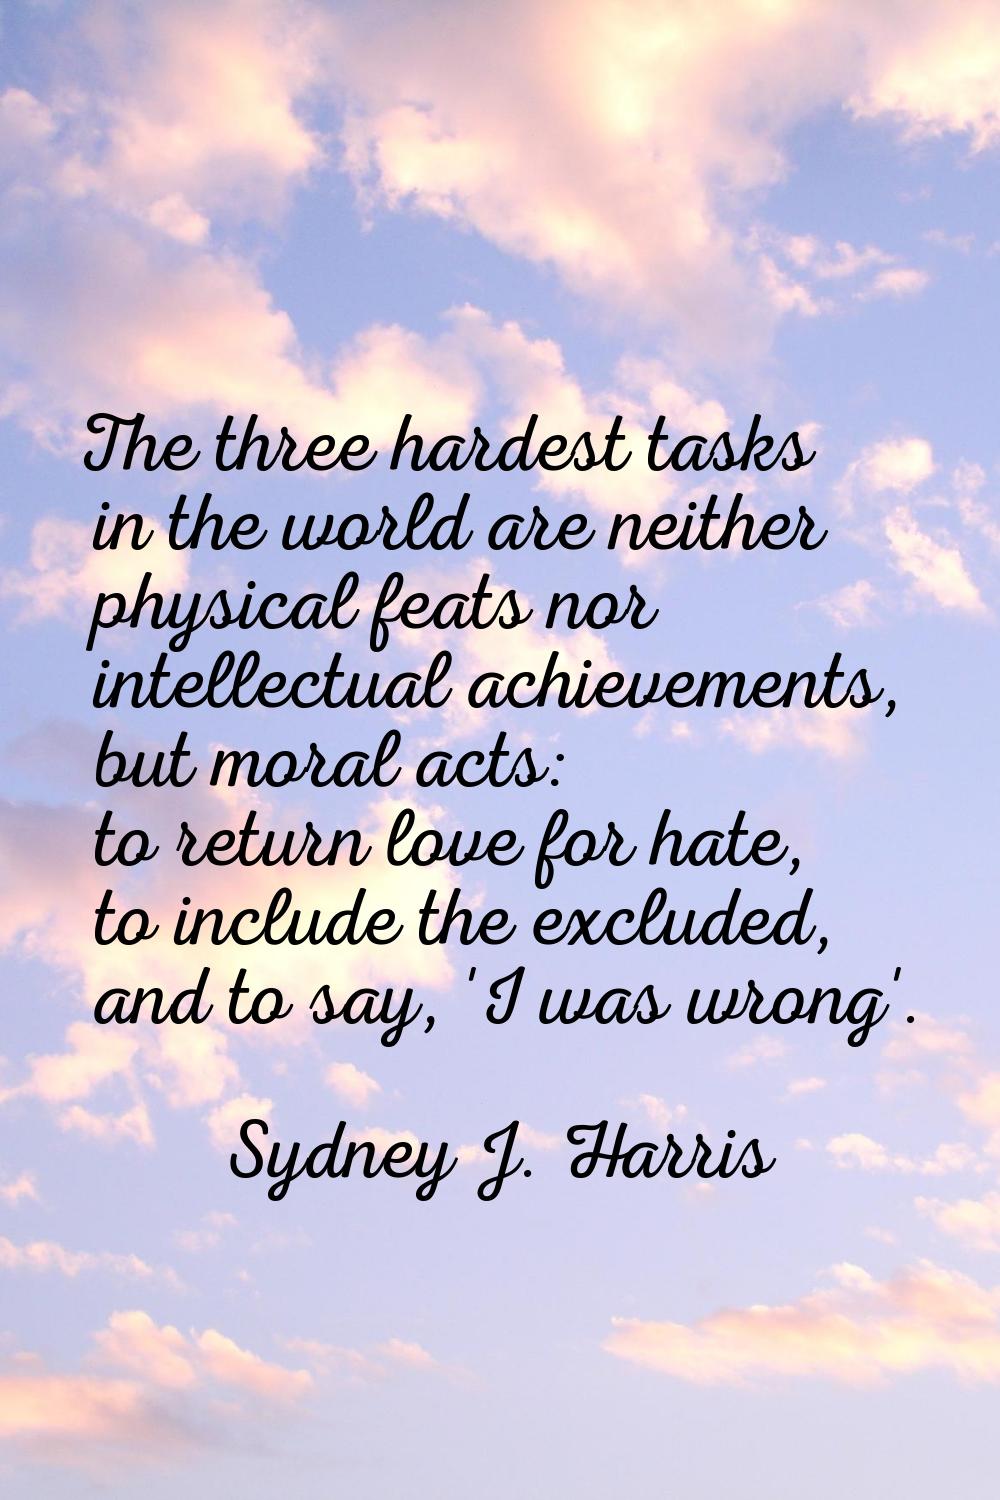 The three hardest tasks in the world are neither physical feats nor intellectual achievements, but 